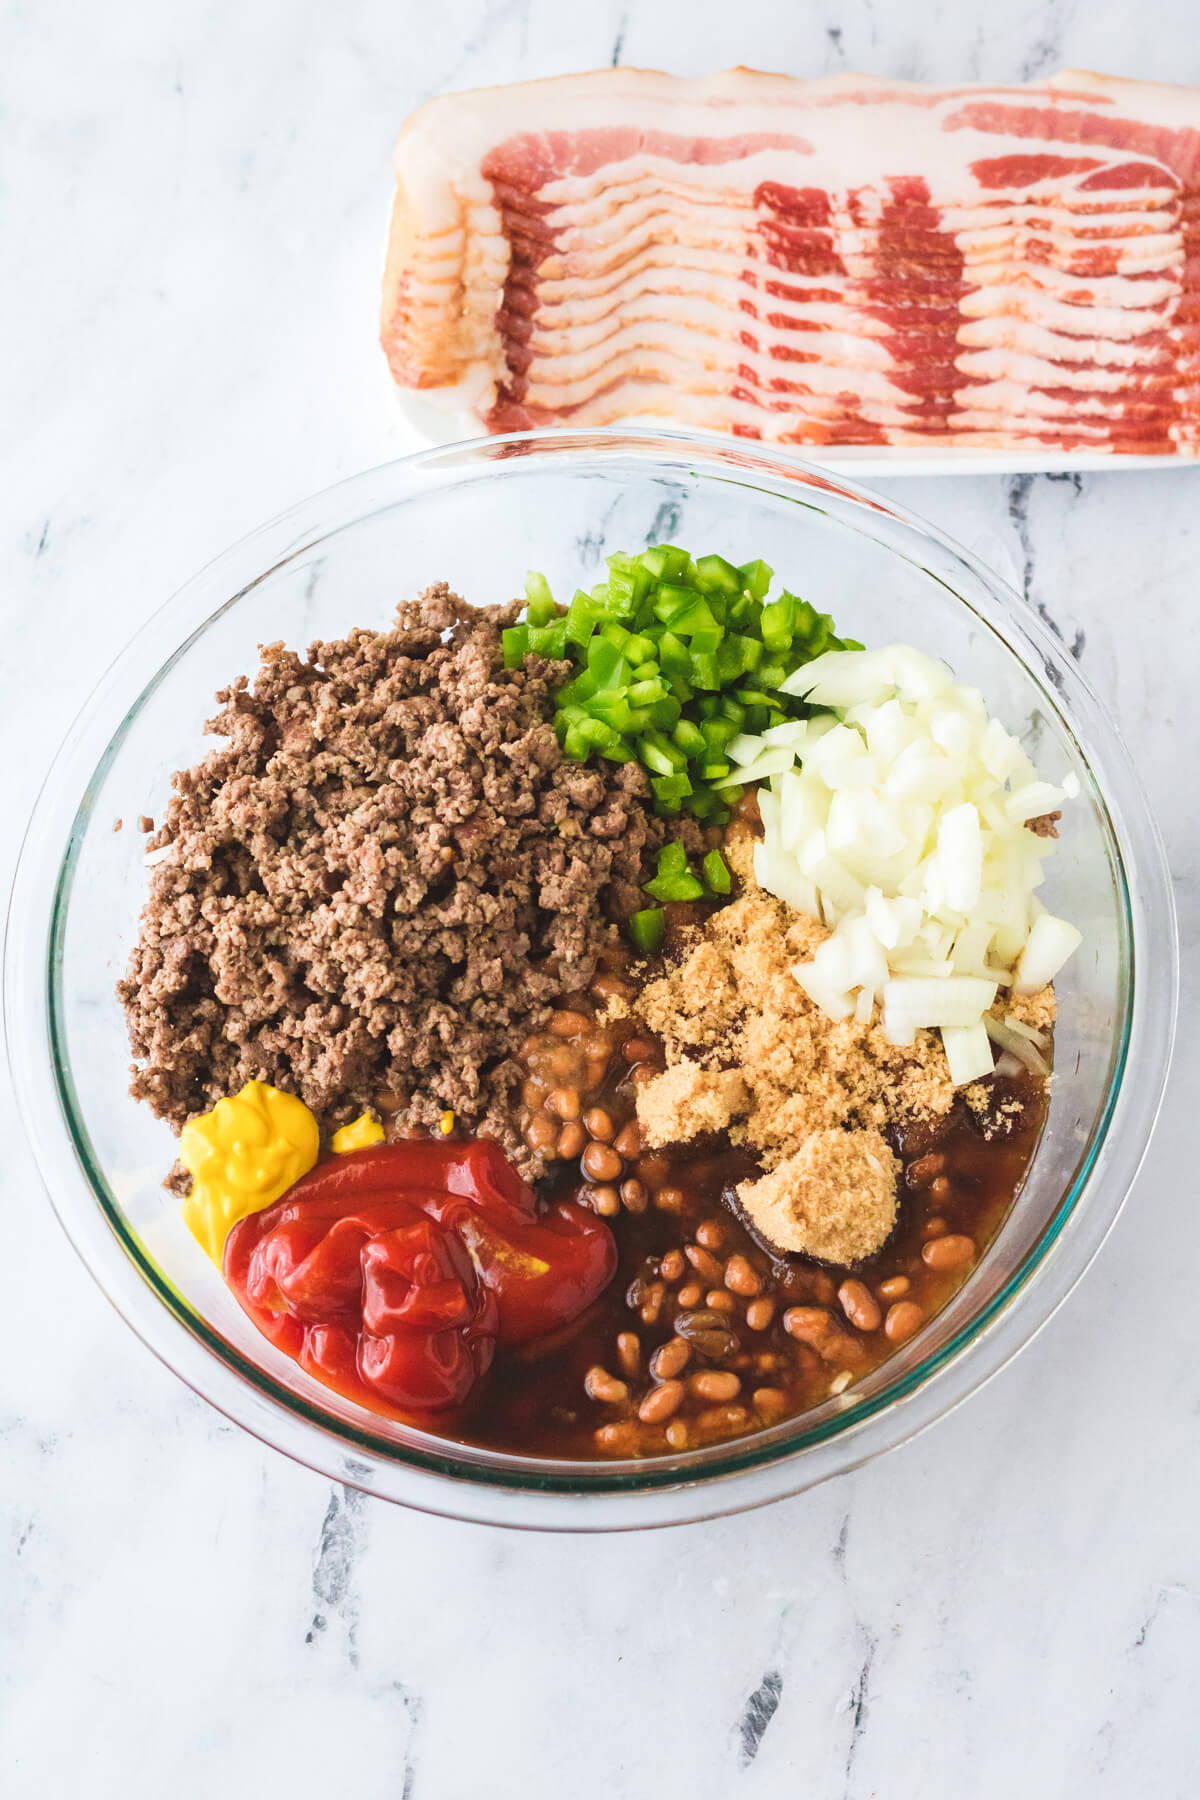 A glass mixing bowl filled with ingredients required to make baked beans with ground beef before they are mixed together.